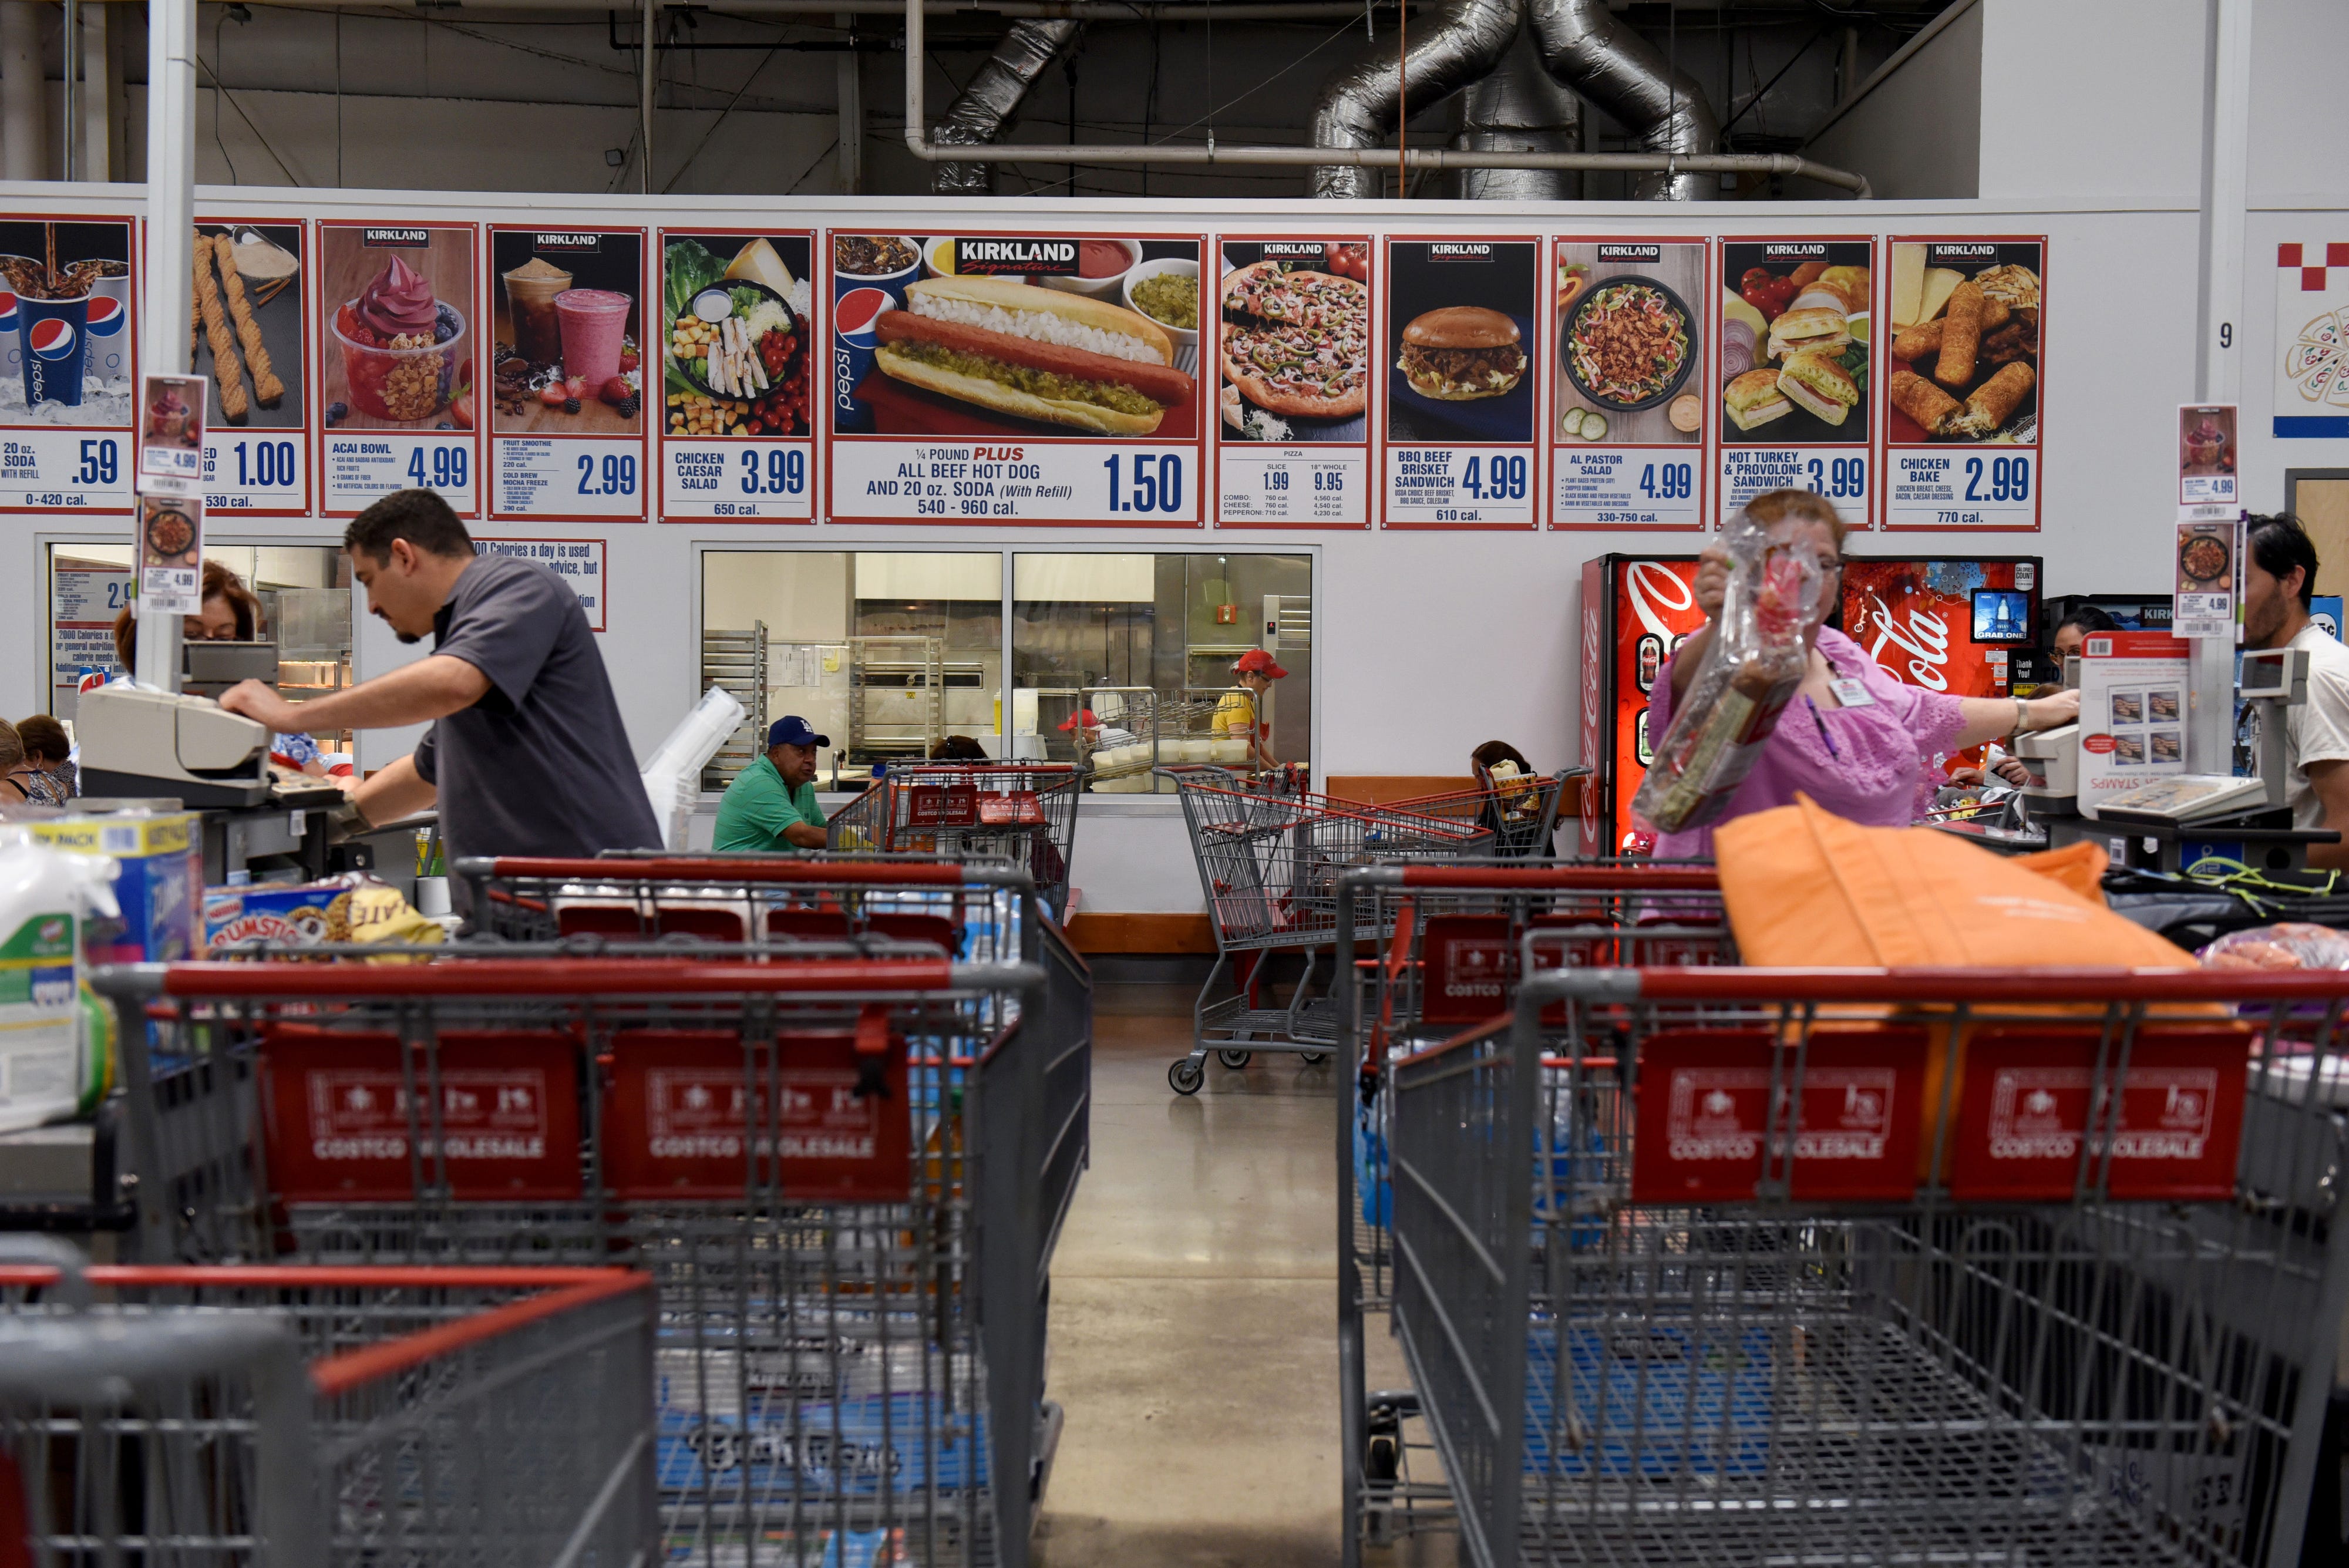 Costco is taking Polish hot dogs off its food court menu. Fans are grieving  - and angry.